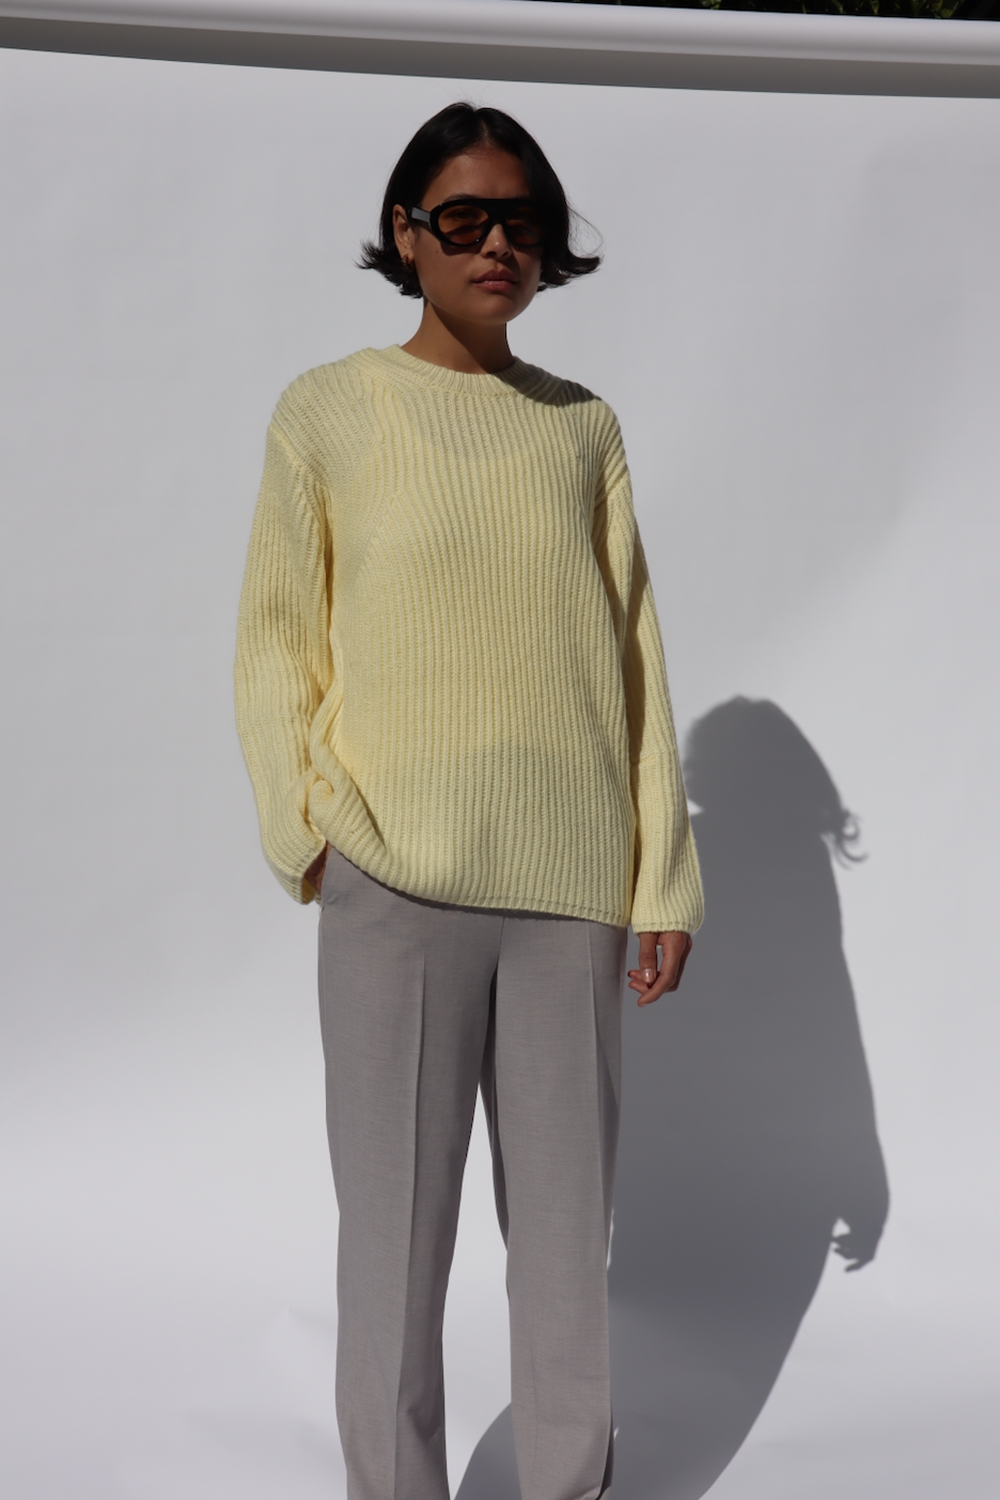 Sally Sweater in Butter - BLANCA